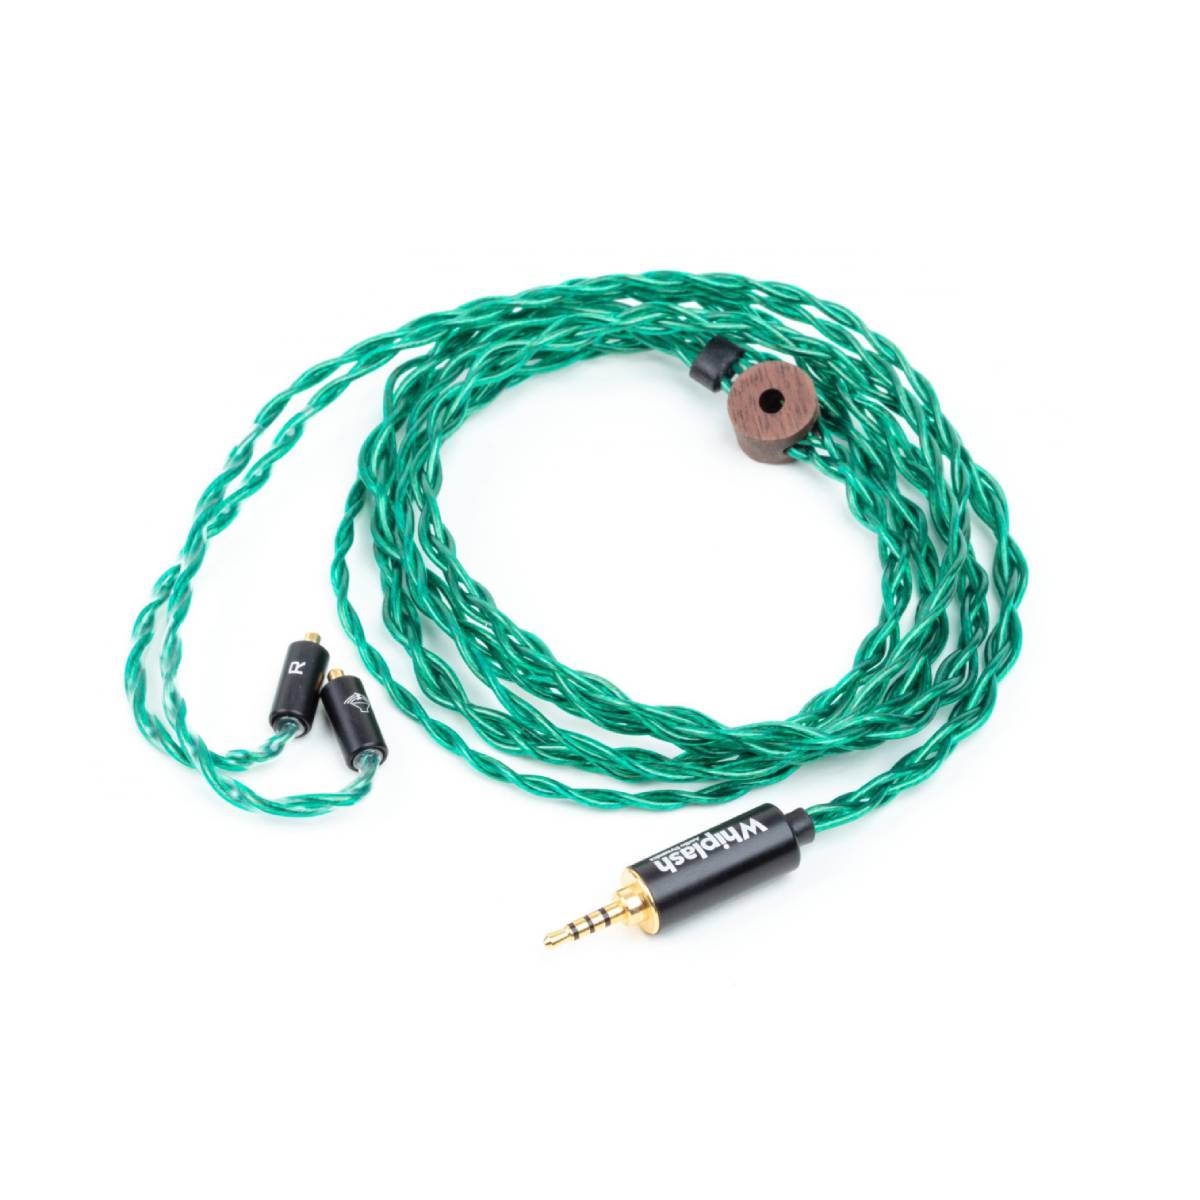 Whiplash Audio green 2 pin cable